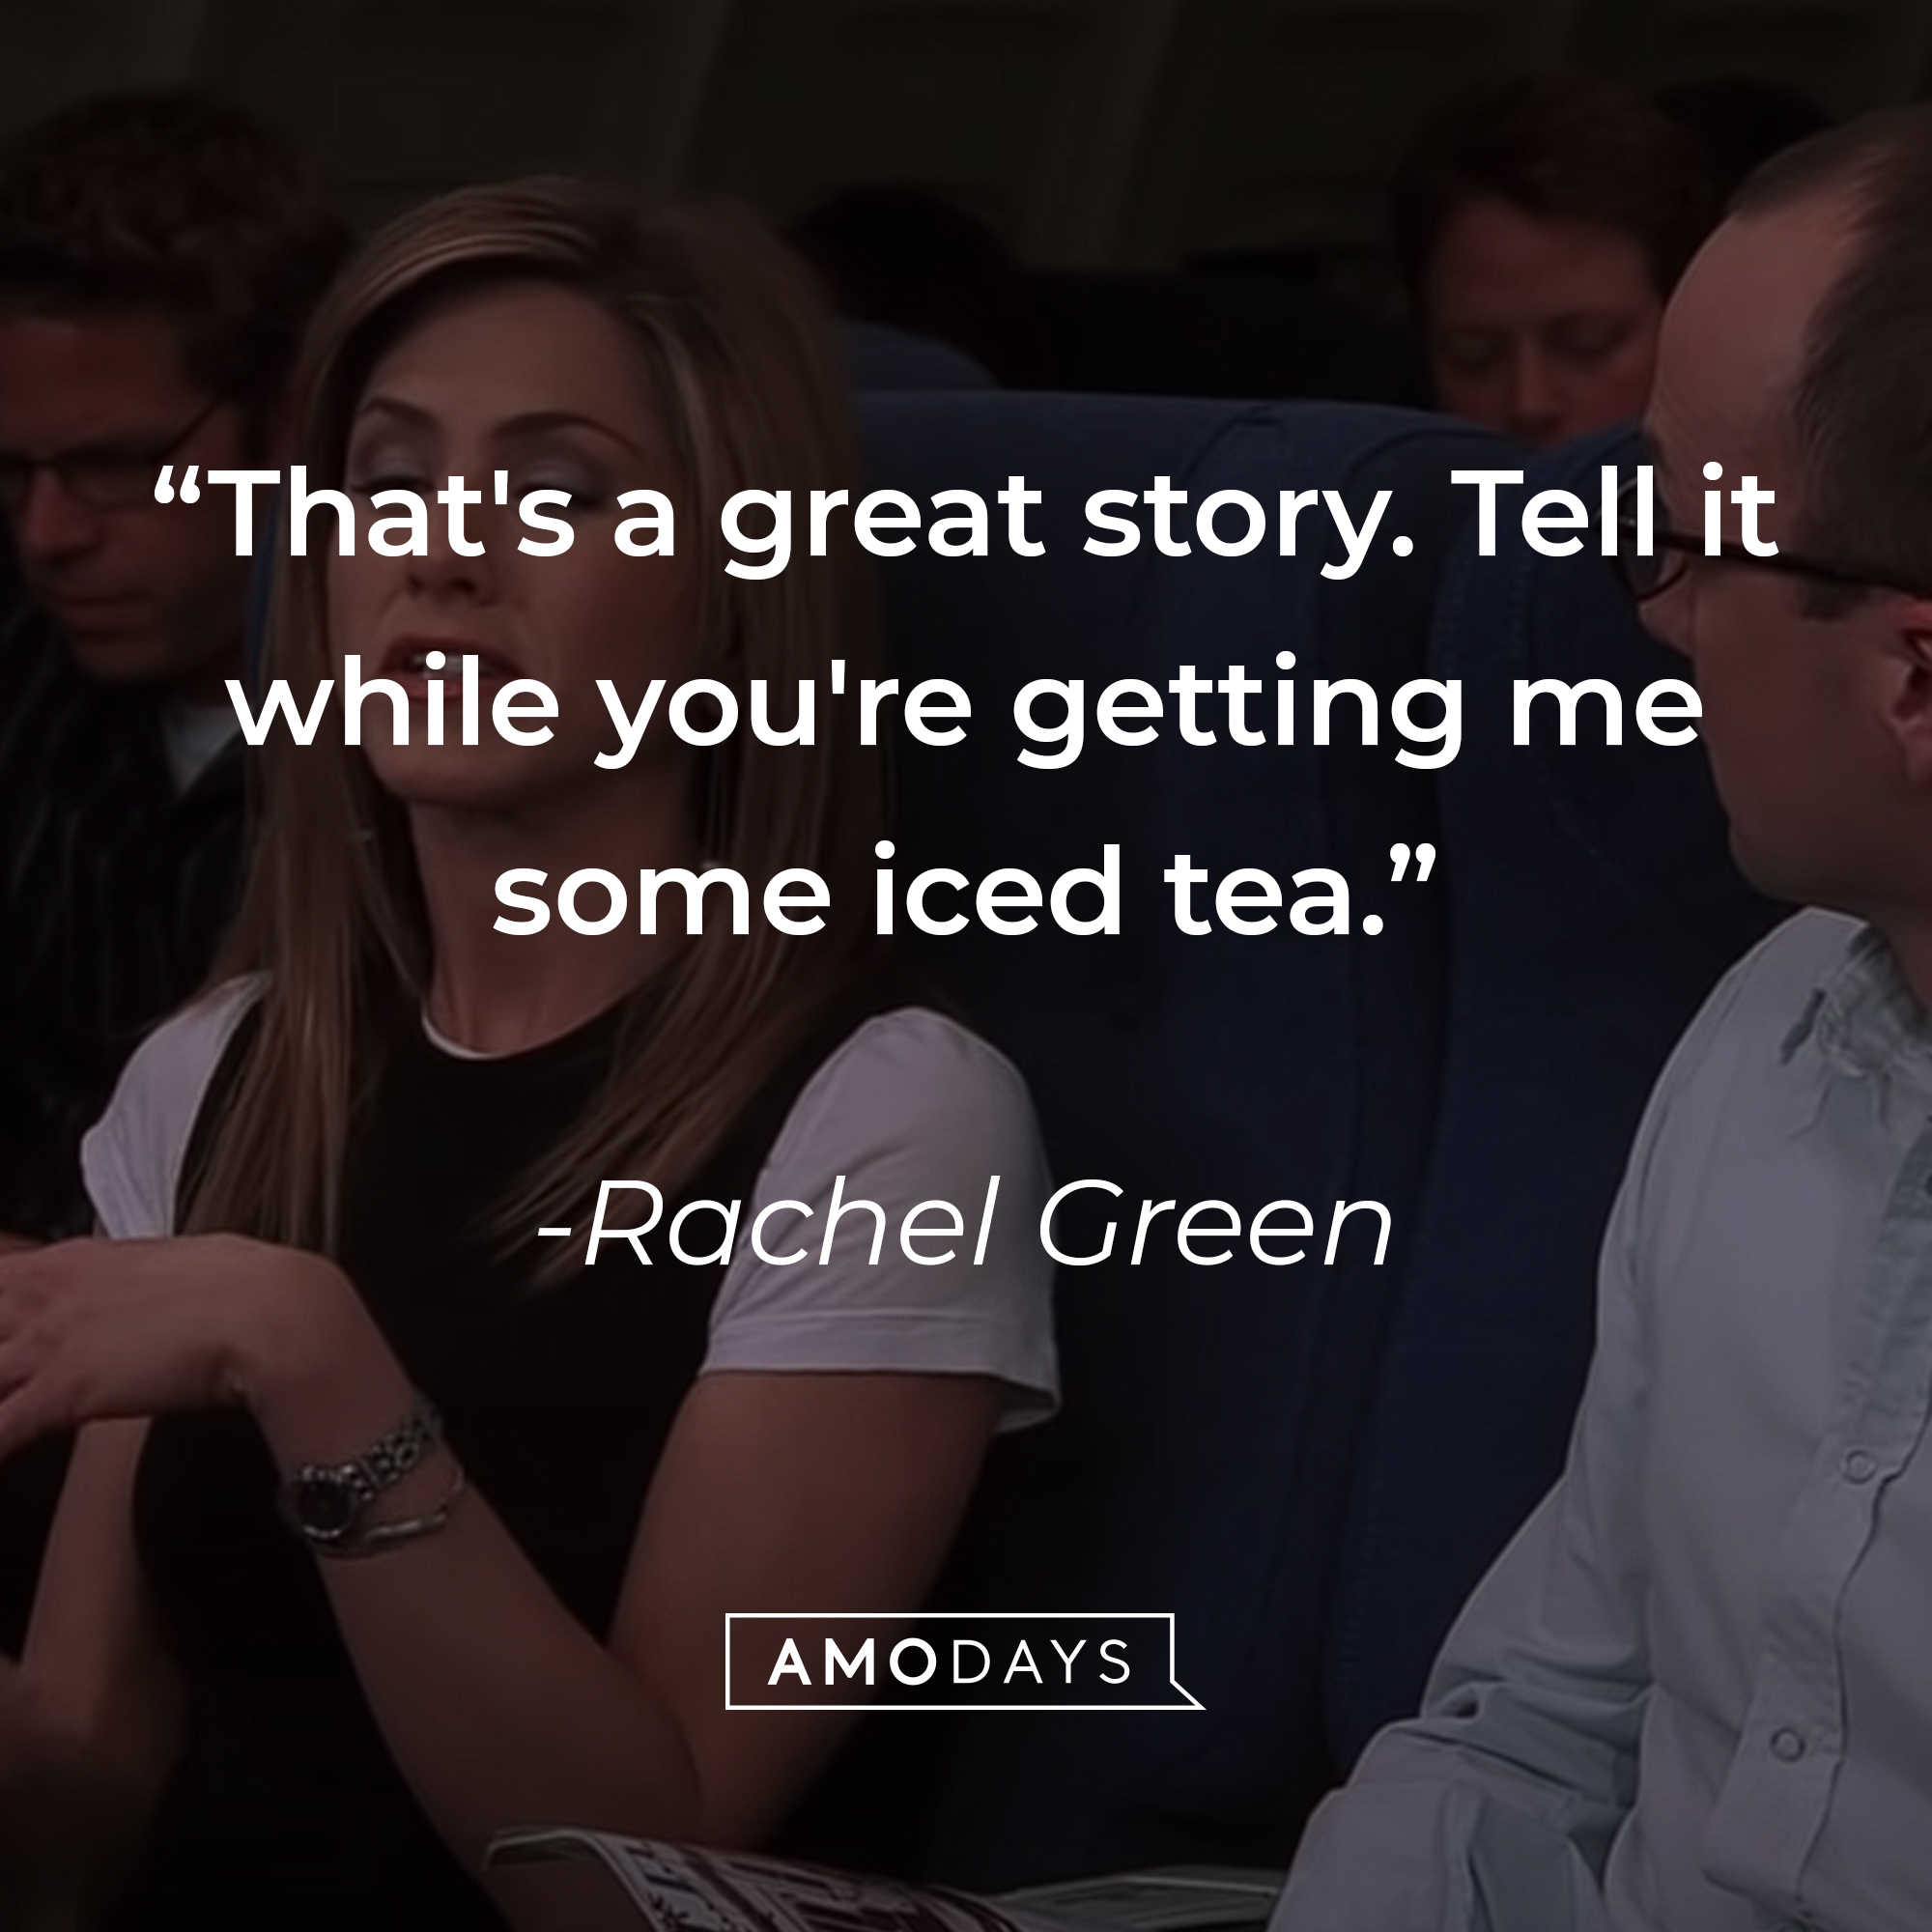 Rachel Green's quote: "That's a great story. Tell it while you're getting me some iced tea." | Source: youtube.com/warnerbrostv